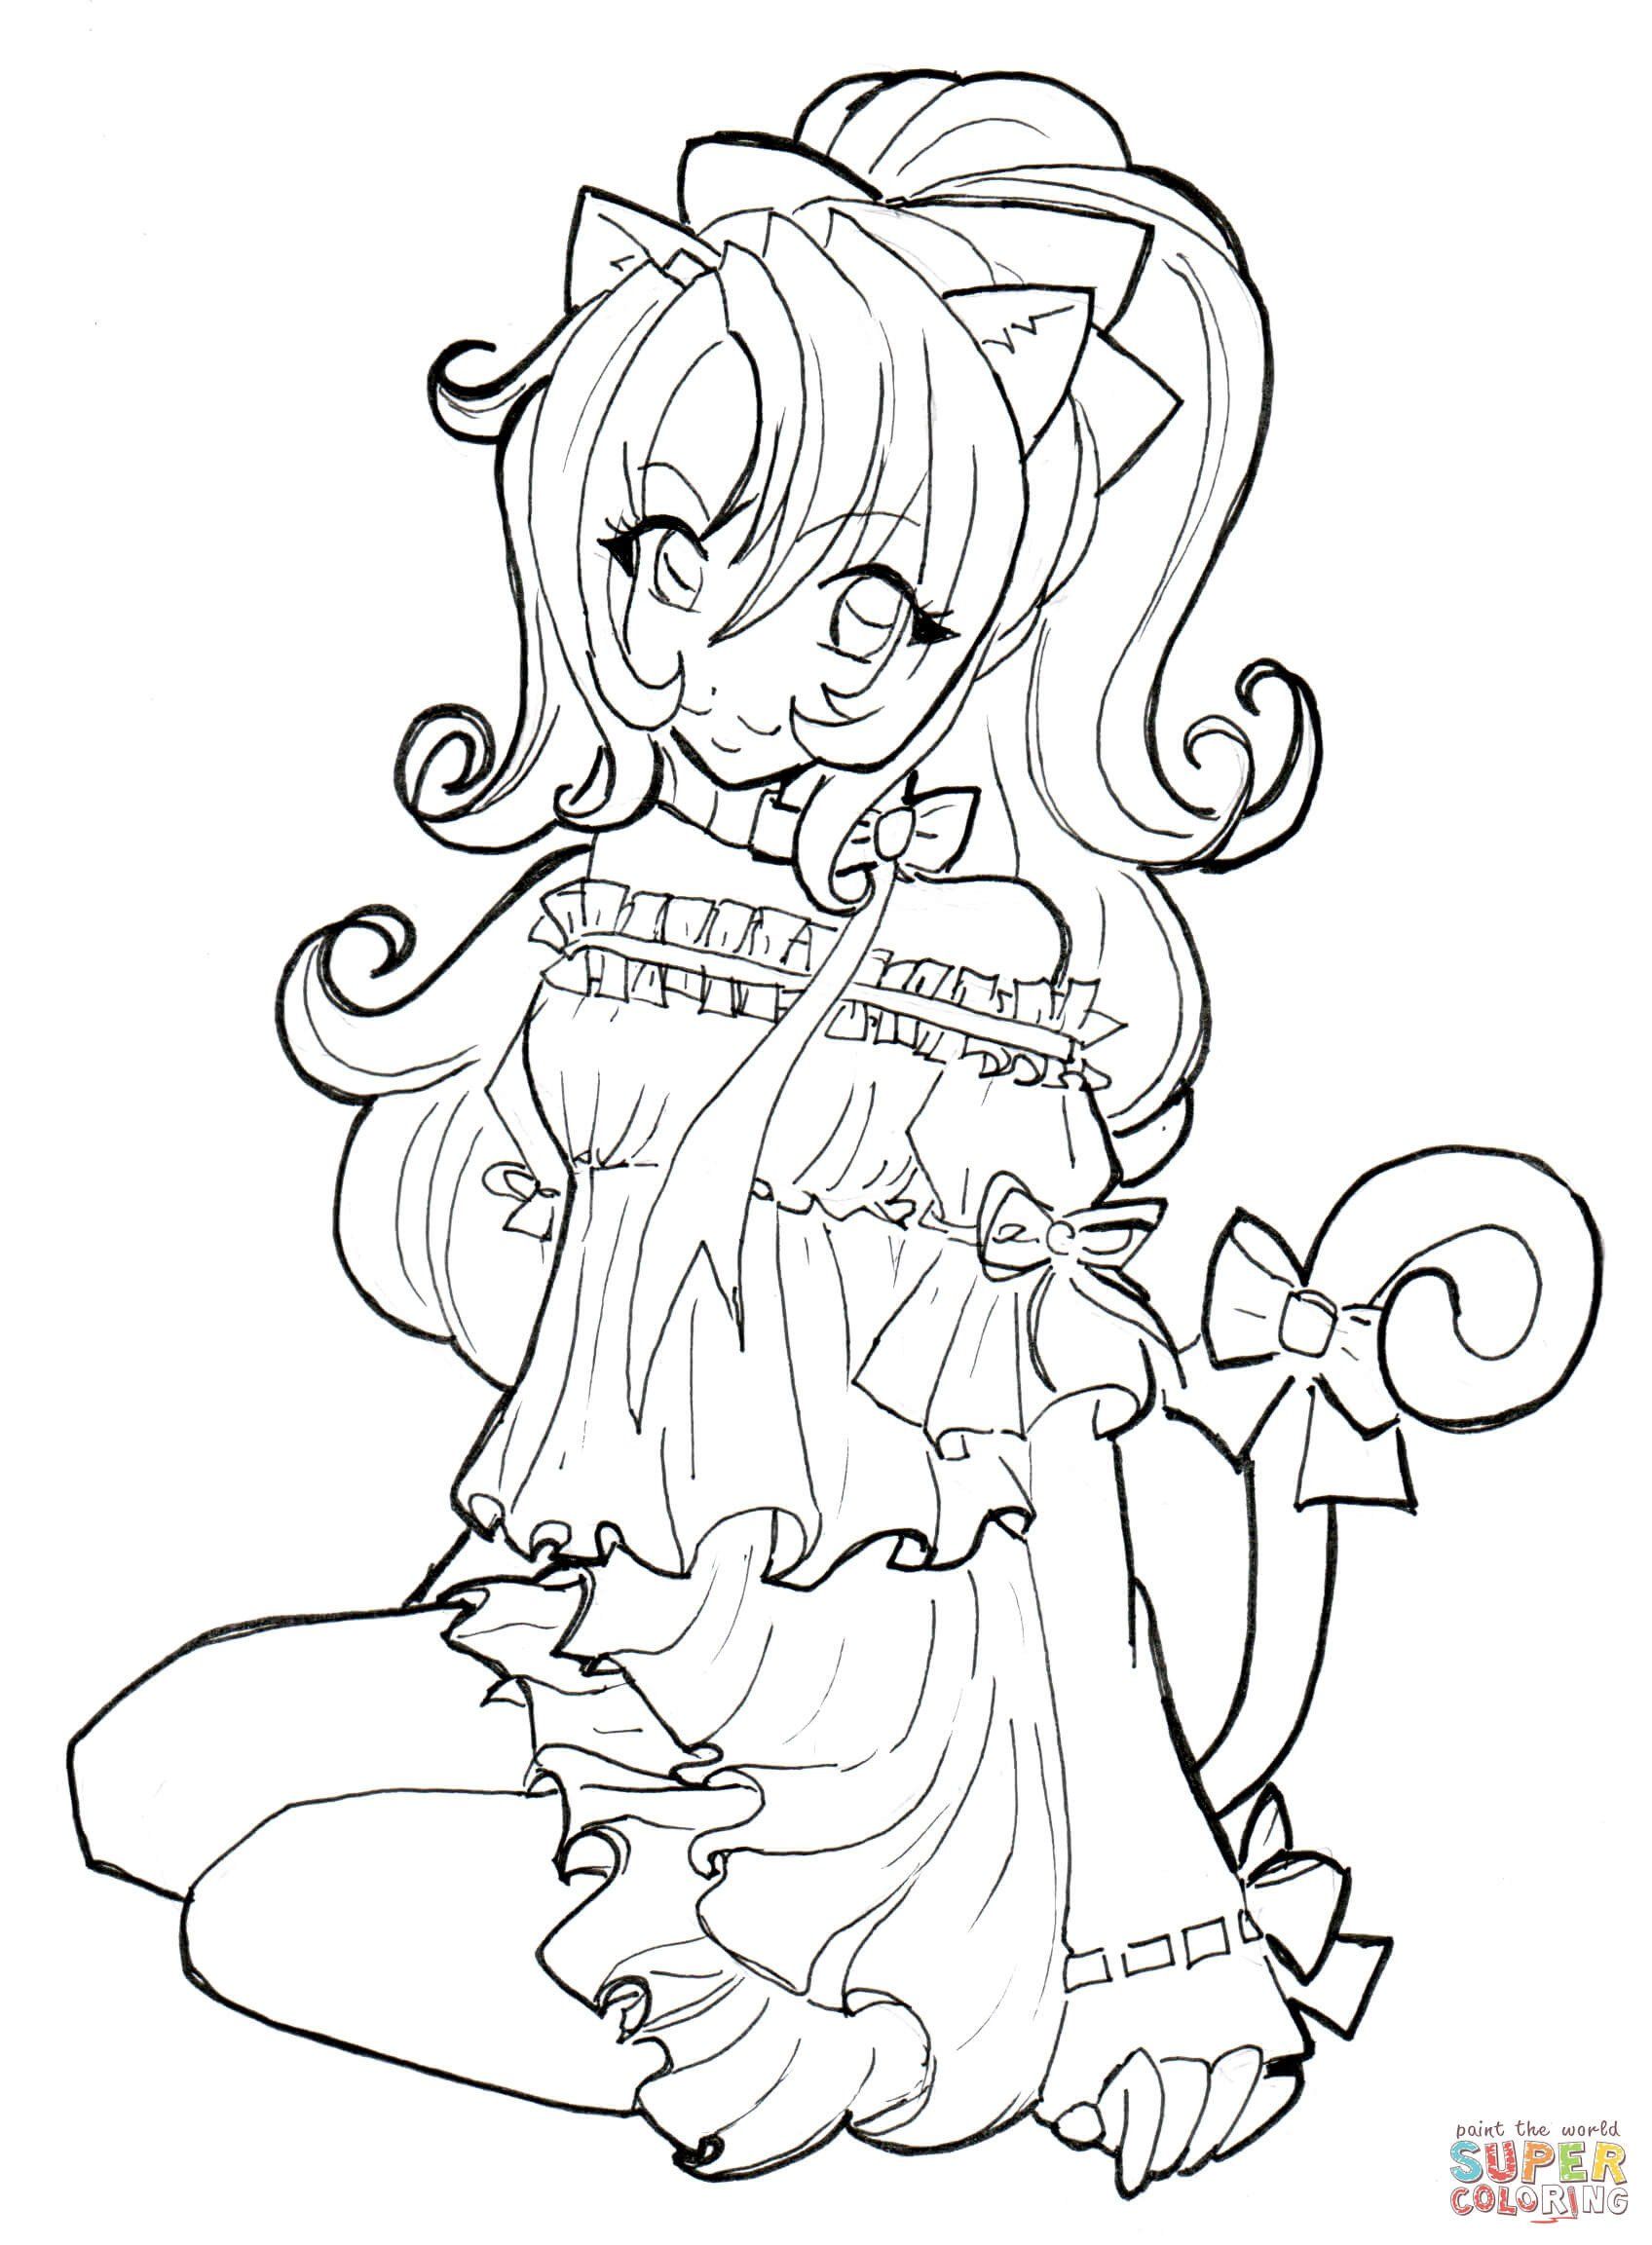 Cute Anime Coloring Pages Best Of Cute Anime Coloring Pages At ...